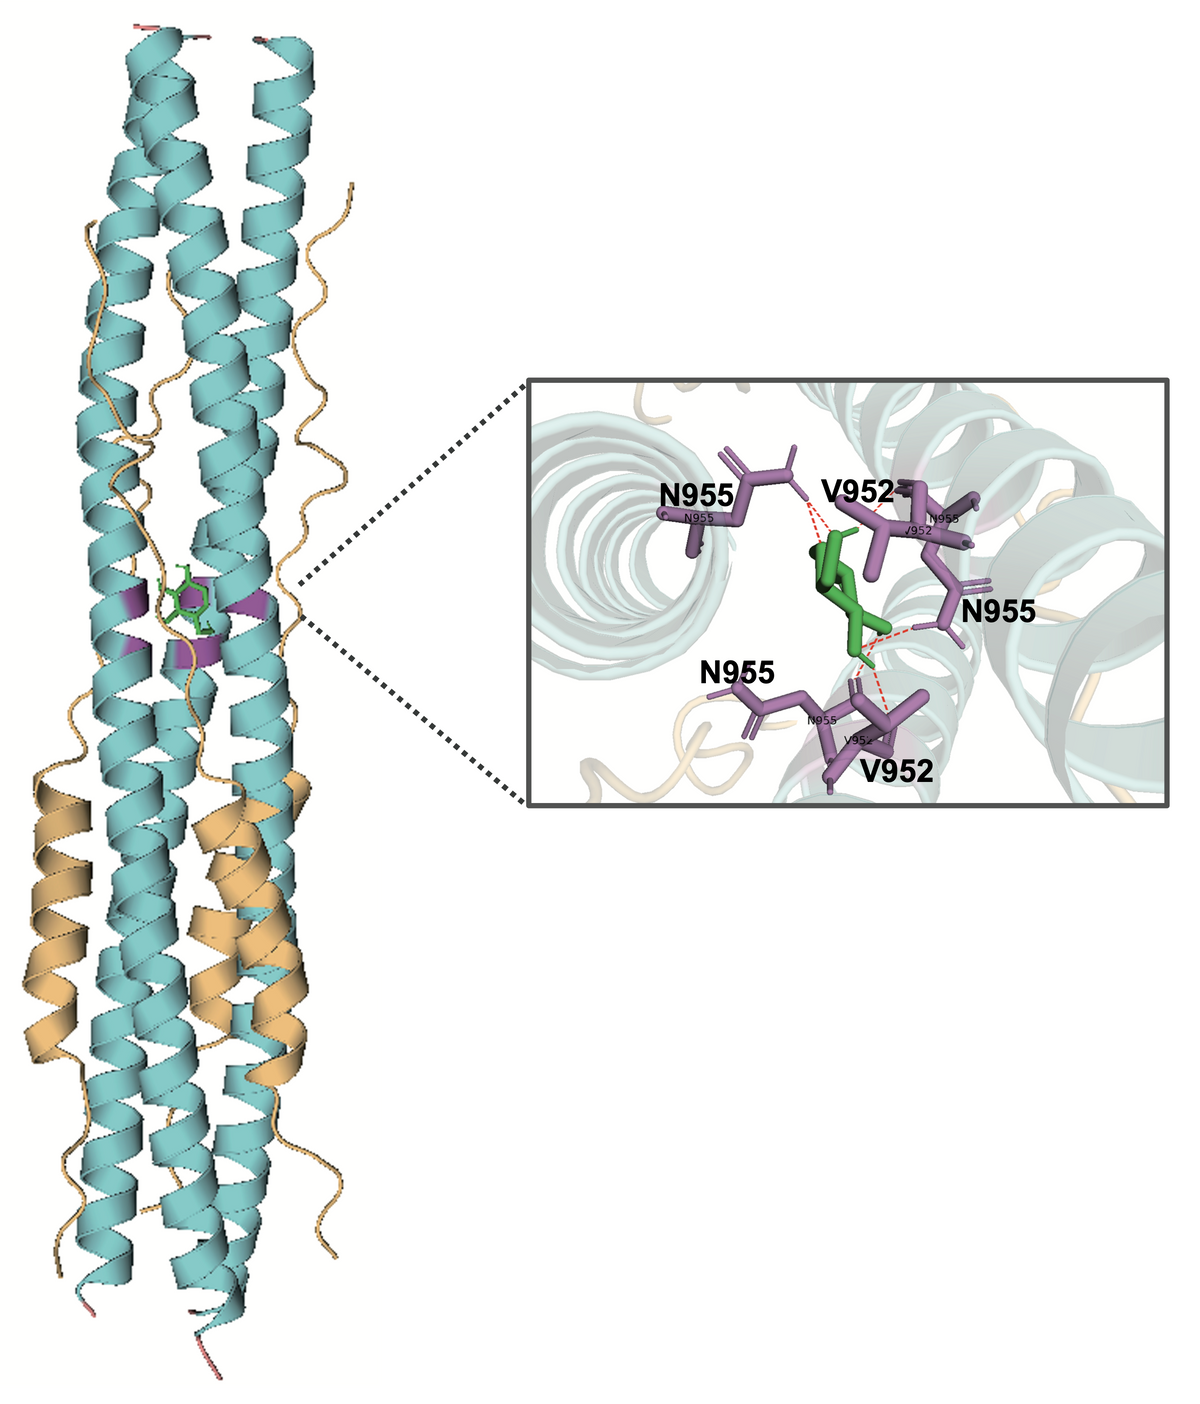 protein schematic of SARS-CoV-2 S2 region with interaction sites for 1,5-AG sugars